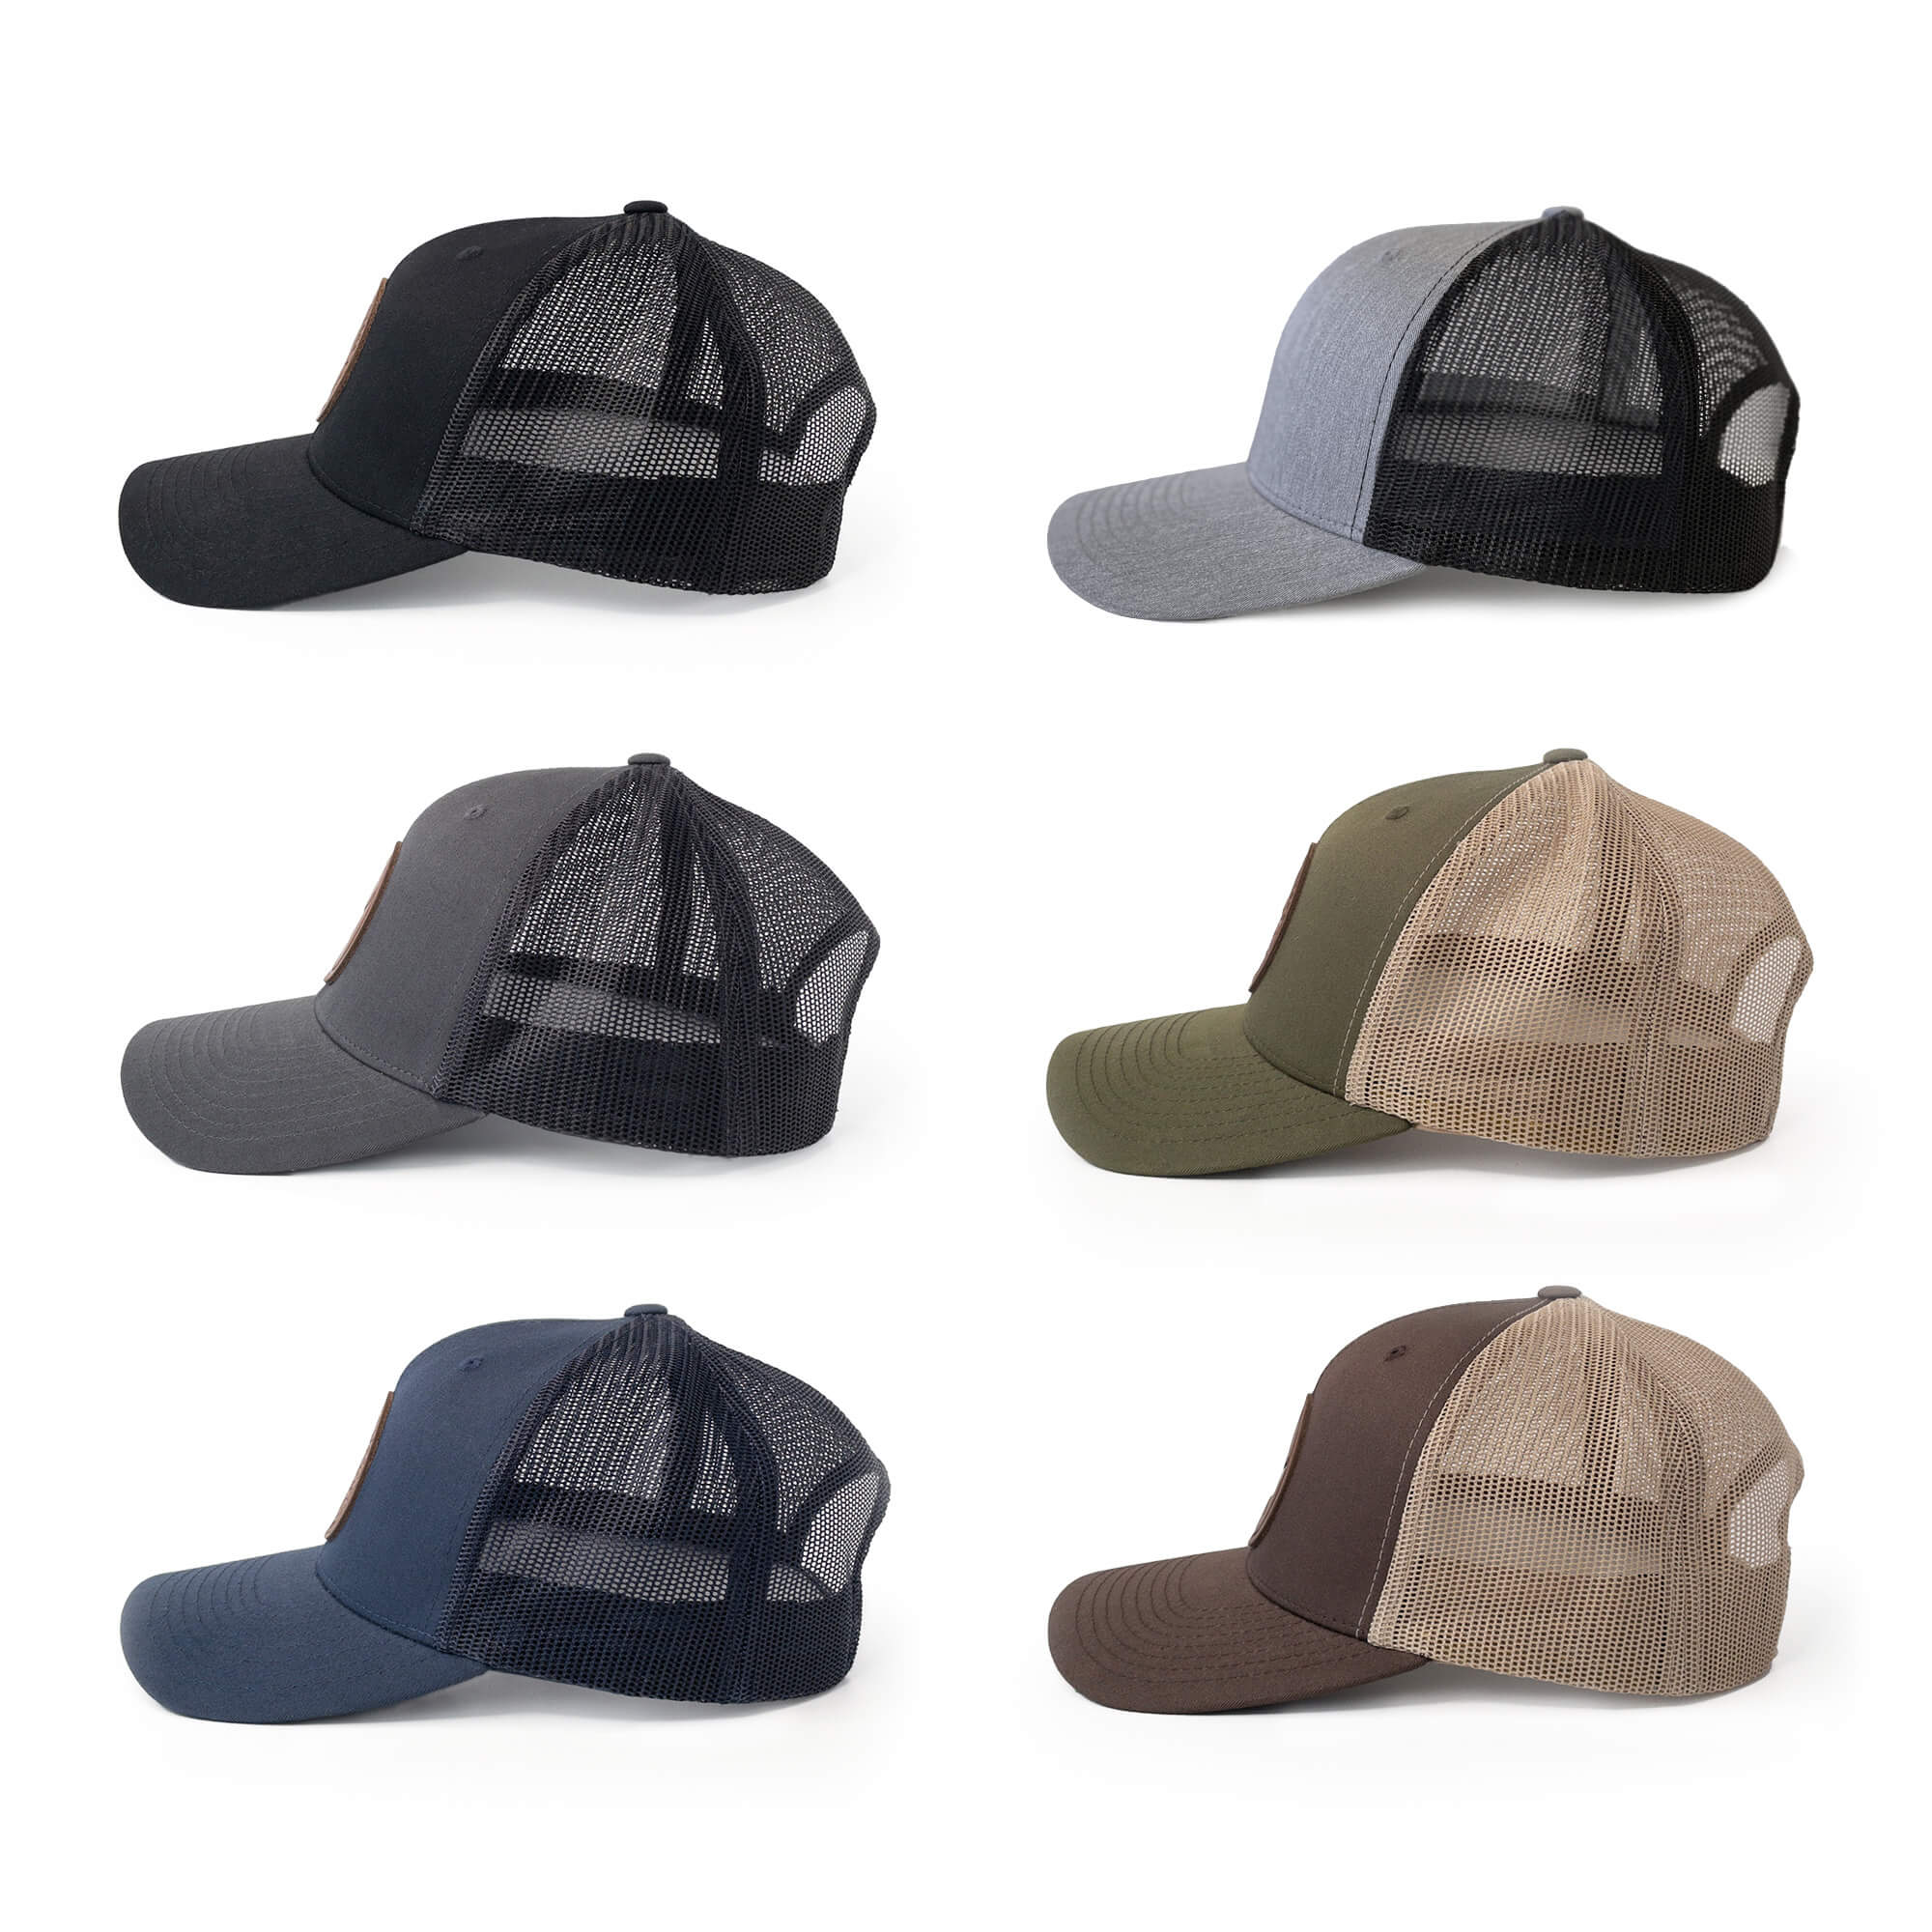 Leather patch trucker hats available in 6 colors | BLACK-003-002, CHARC-003-002, NAVY-003-002, HGREY-003-002, MOSS-003-002, BROWN-003-002